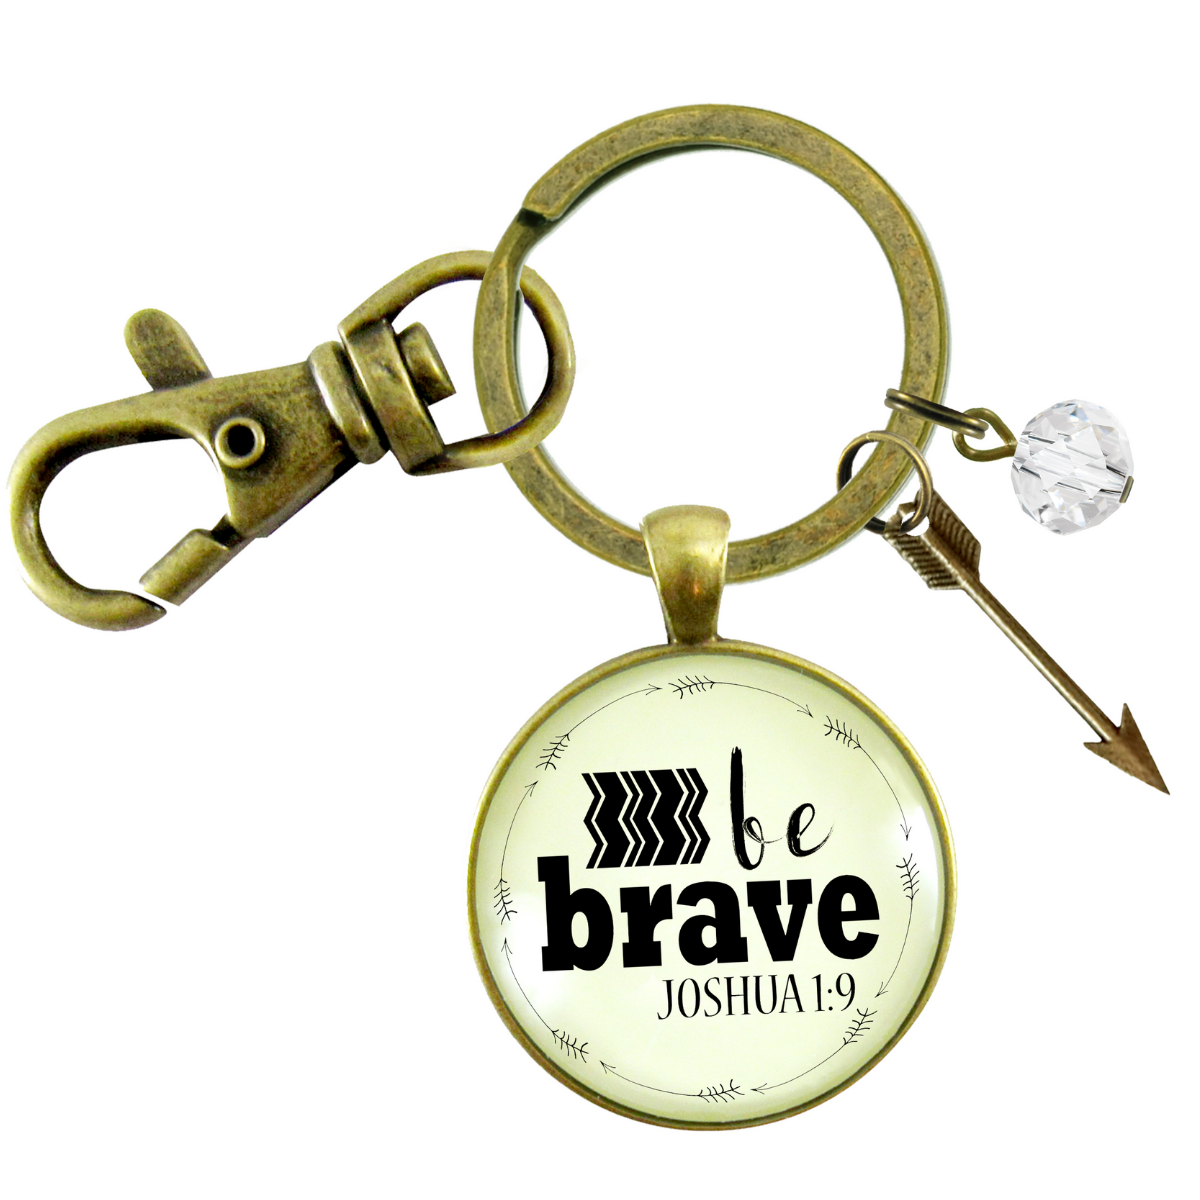 Be Brave Keychain Faith Bible Strength Quote Jewelry Arrow Charm - Gutsy Goodness Handmade Jewelry;Be Brave Keychain Faith Bible Strength Quote Jewelry Arrow Charm - Gutsy Goodness Handmade Jewelry Gifts